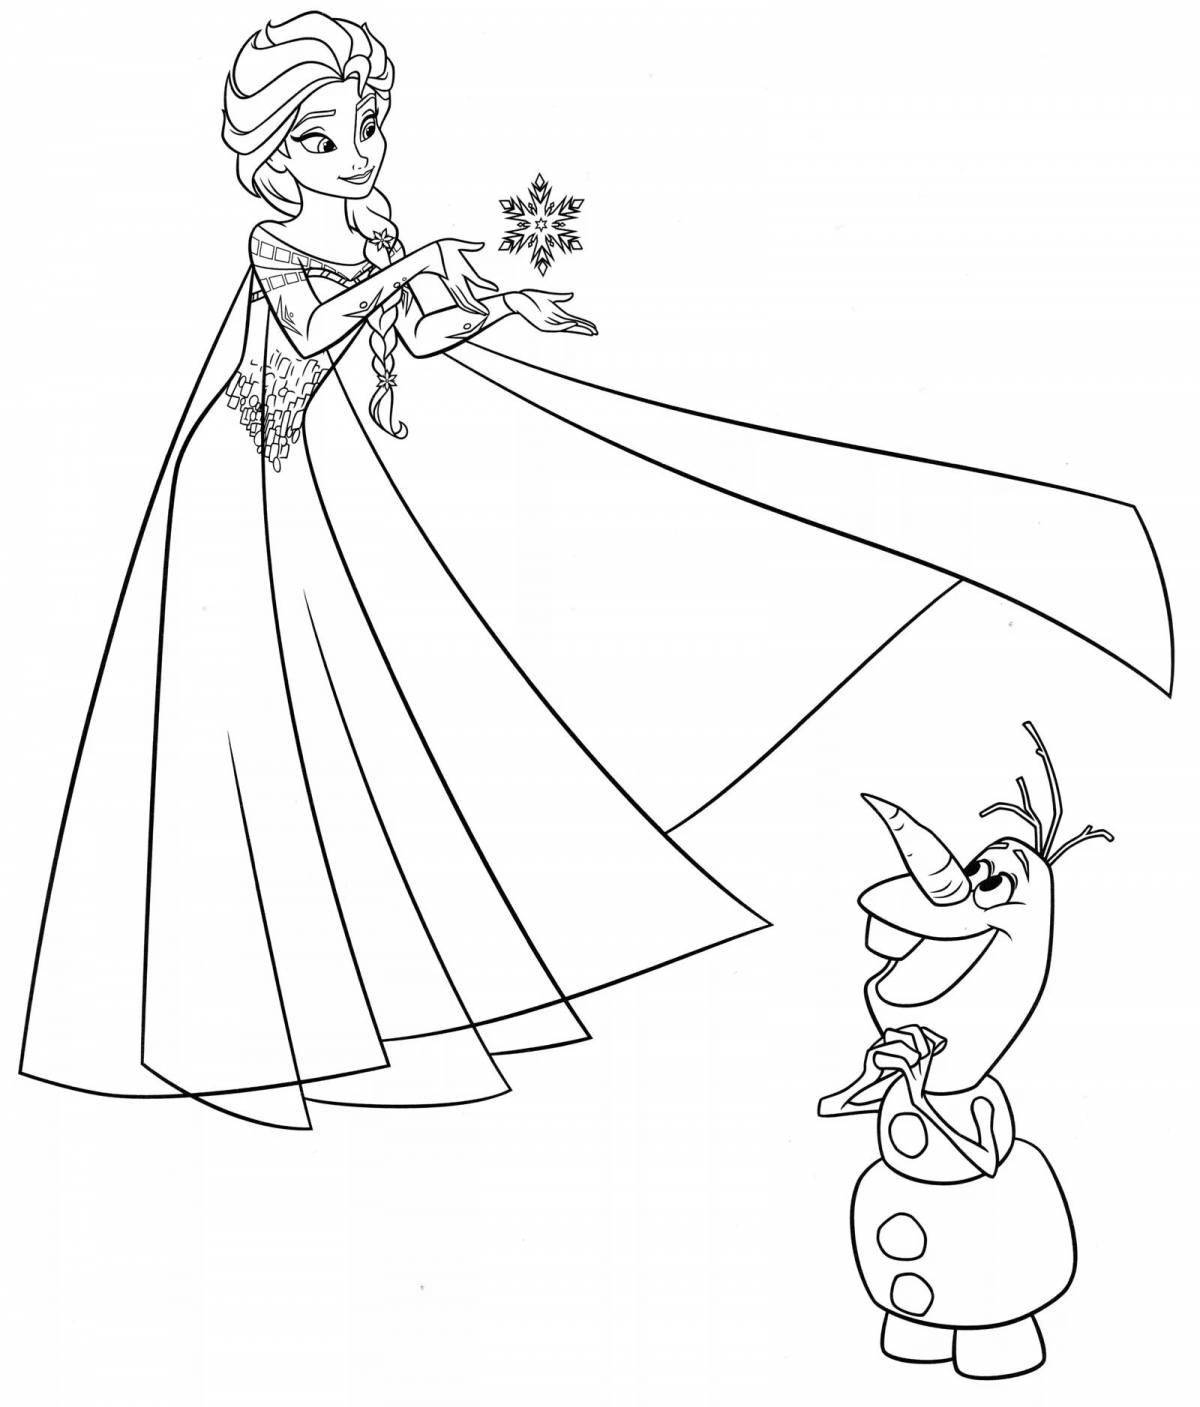 Charming coloring elsa and olaf